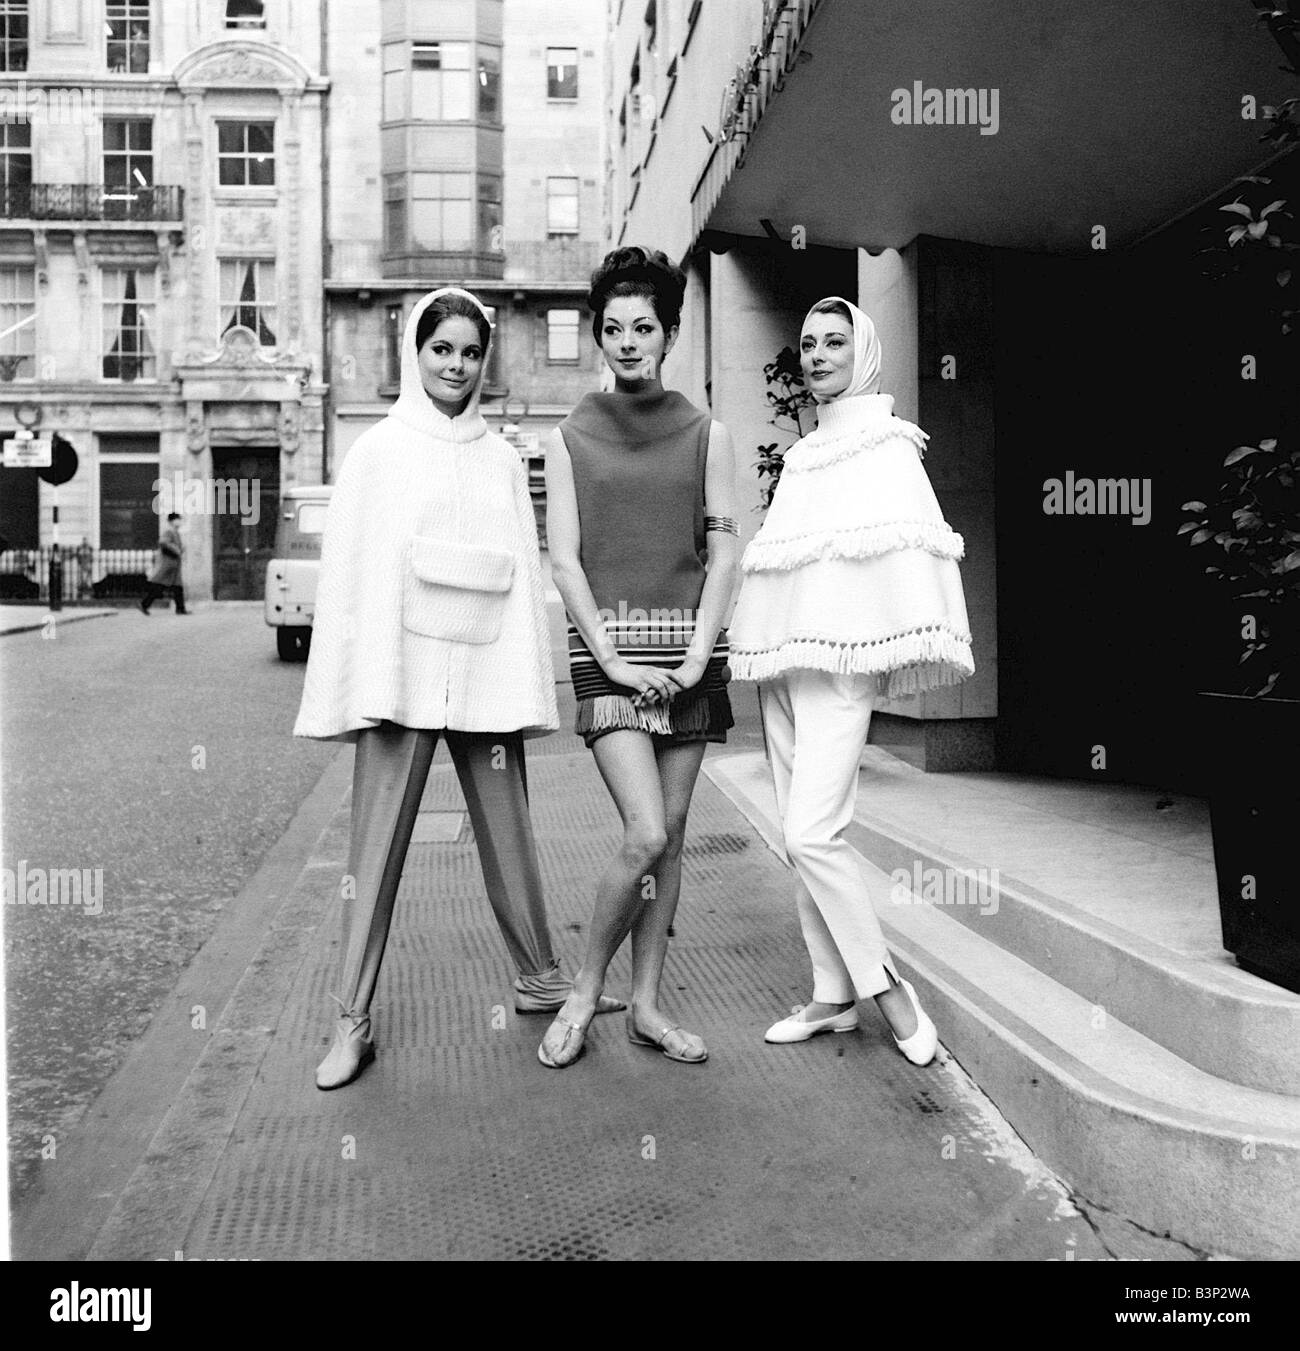 The cape became the item every girl wanted in 1962 Models posed in the street wearing the capes with the hoods over their heads Stock Photo